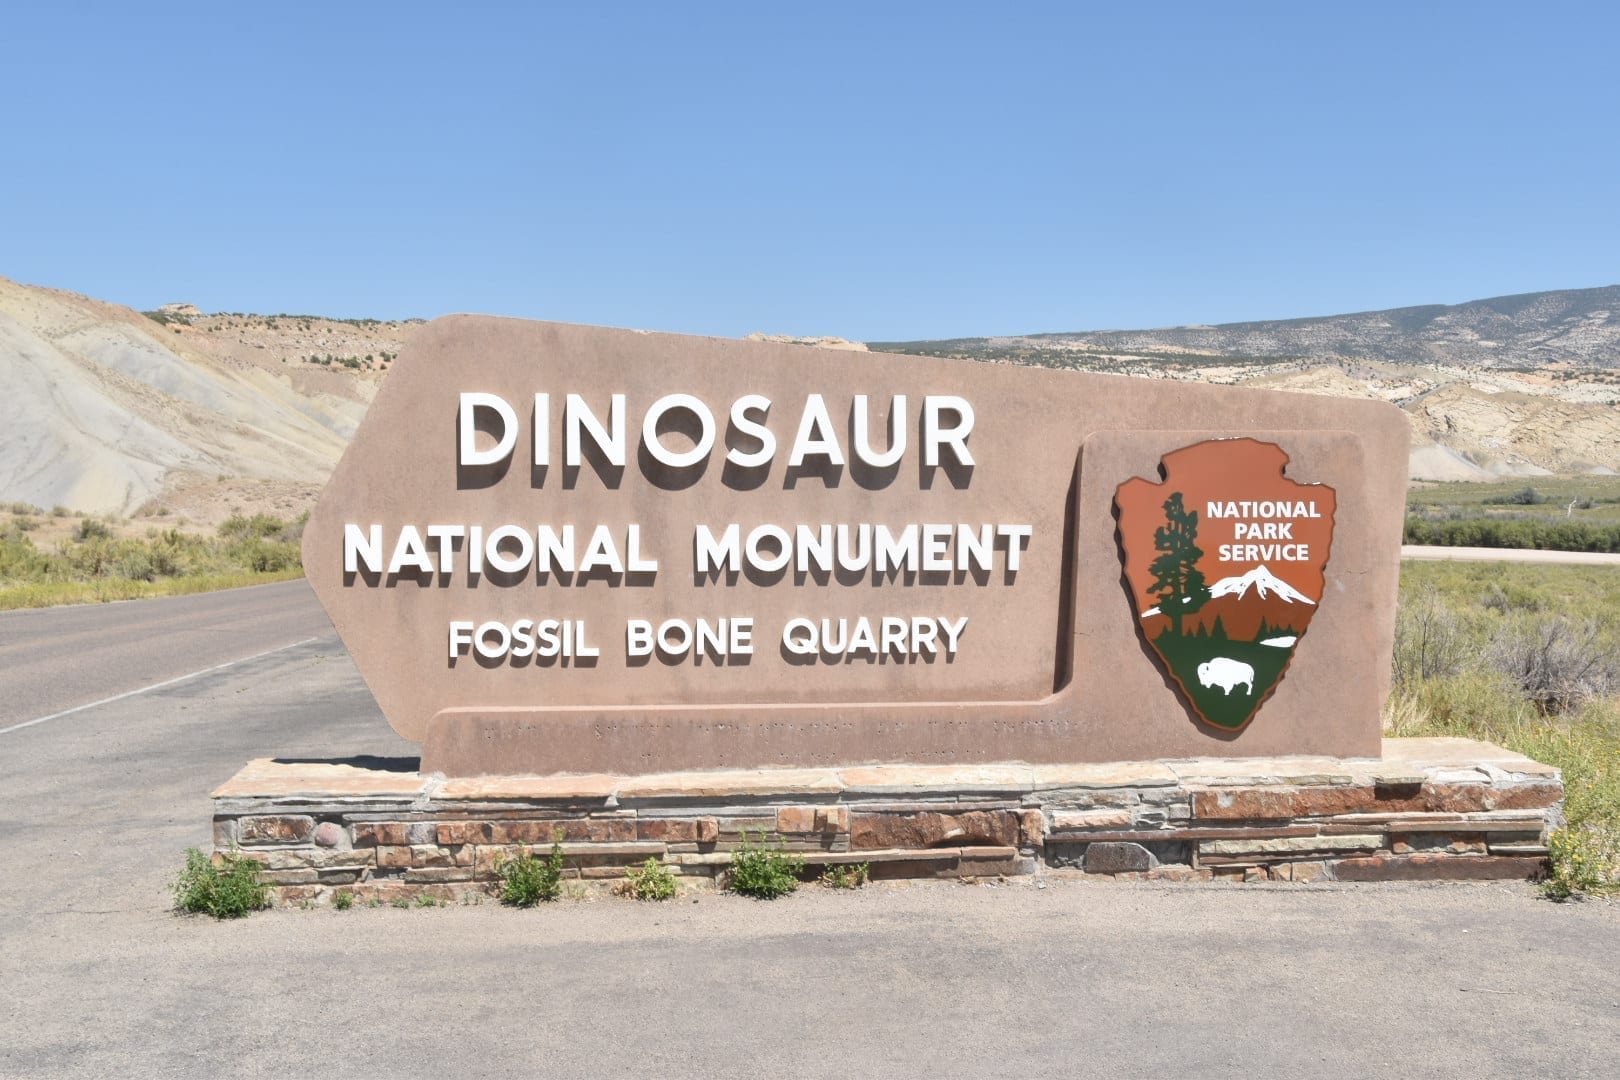 Visiting Dinosaur National Monument – An Amazing Guide